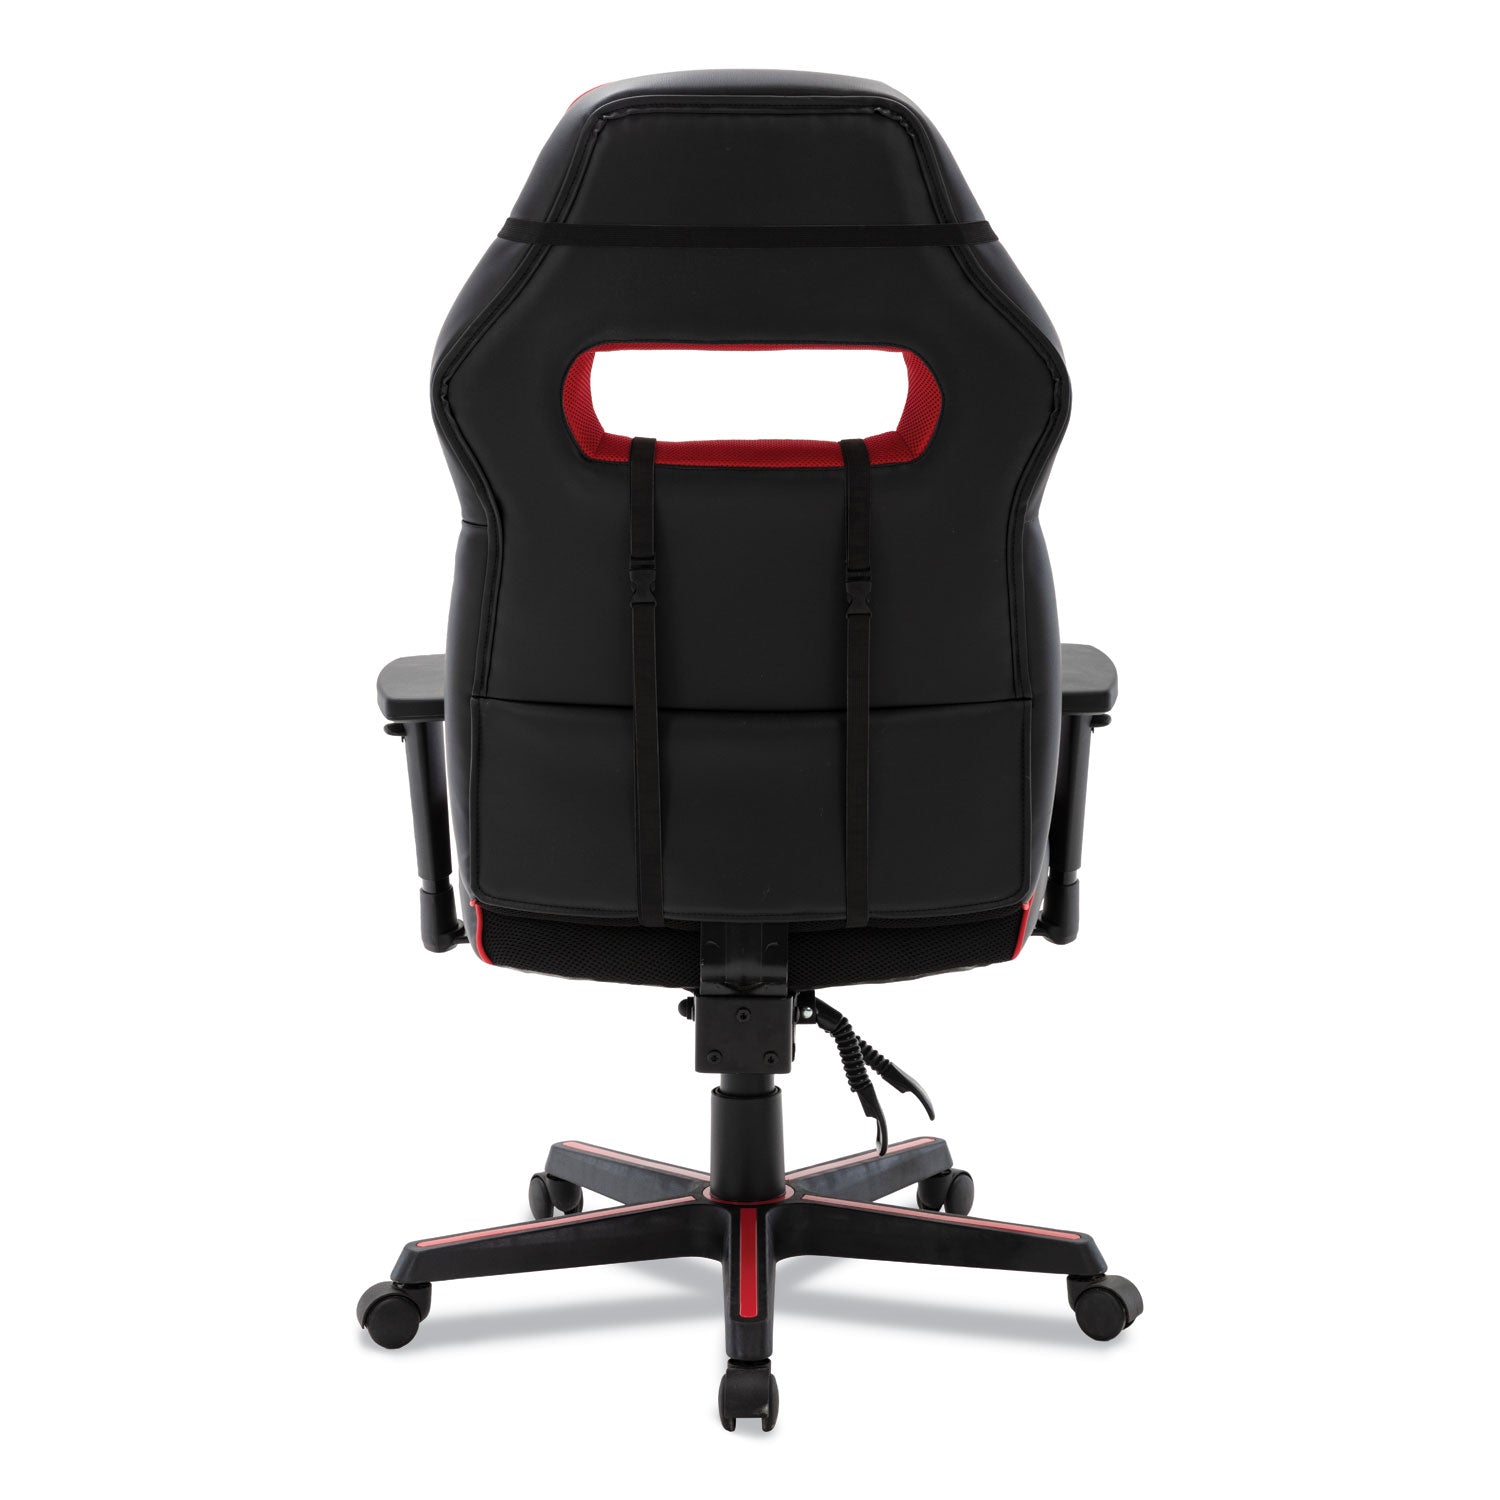 racing-style-ergonomic-gaming-chair-supports-275-lb-1591-to-198-seat-height-black-red-trim-seat-back-black-red-base_alegm4136 - 7